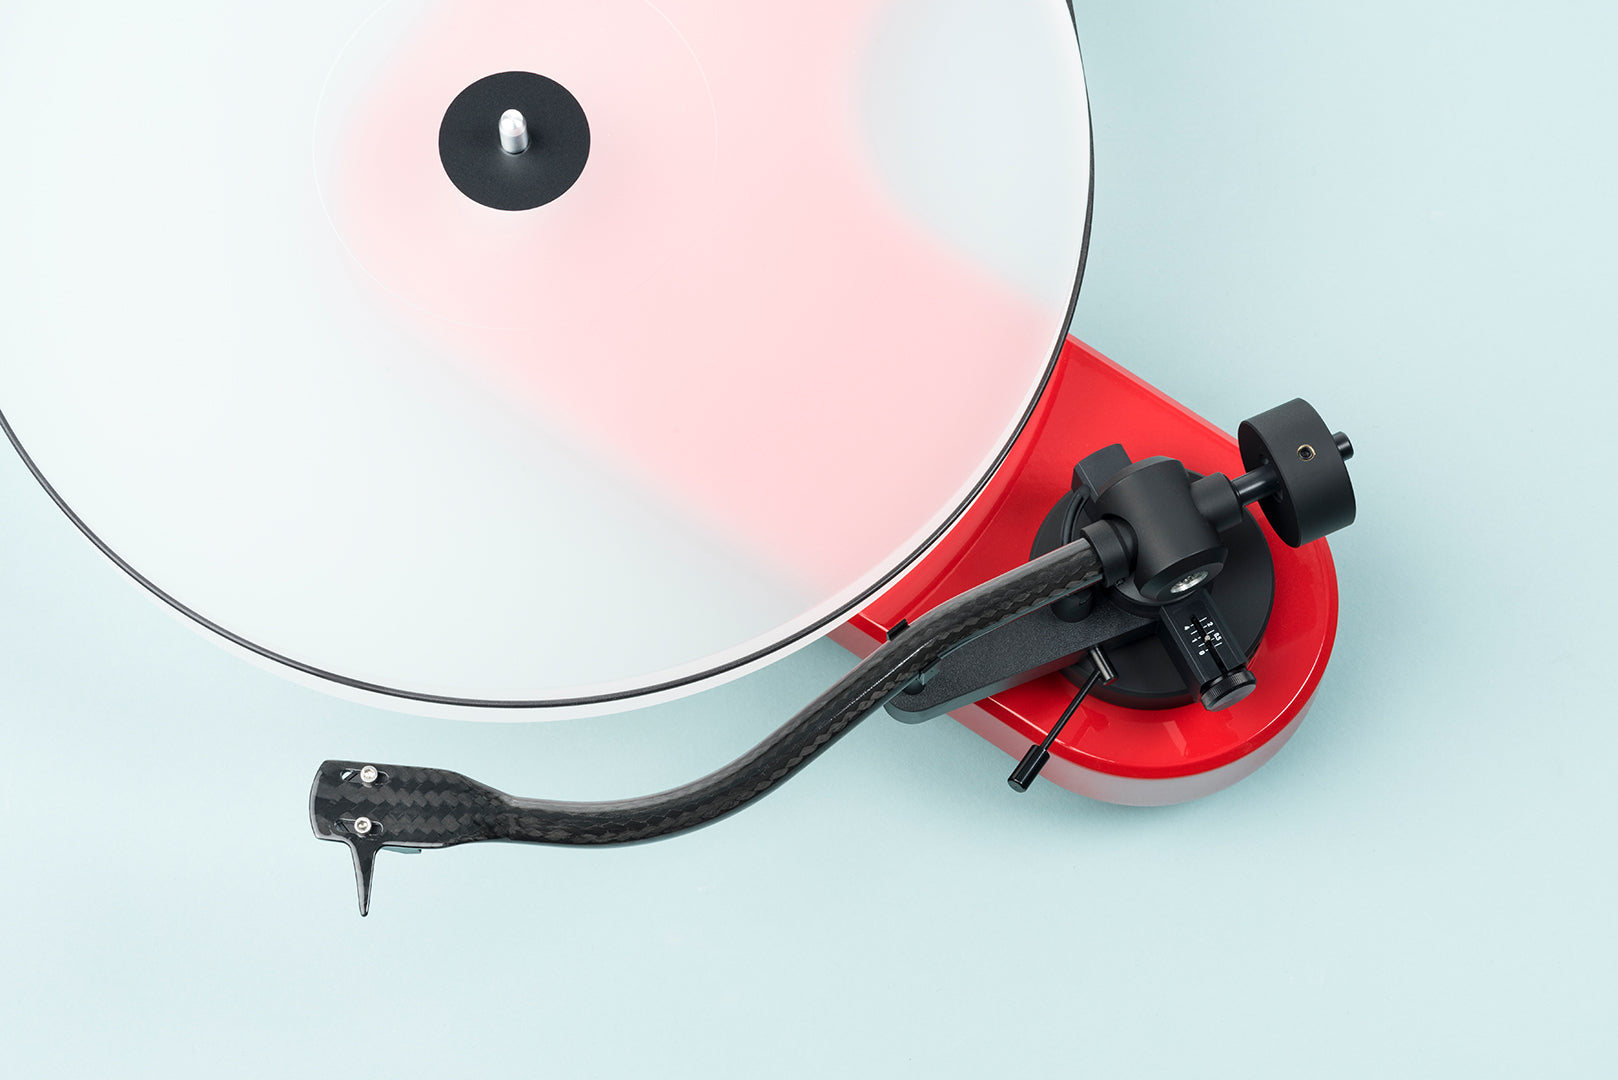 Pro-ject RPM 1 - Carbon Manual Turntable with 8,6'' carbon tonearm